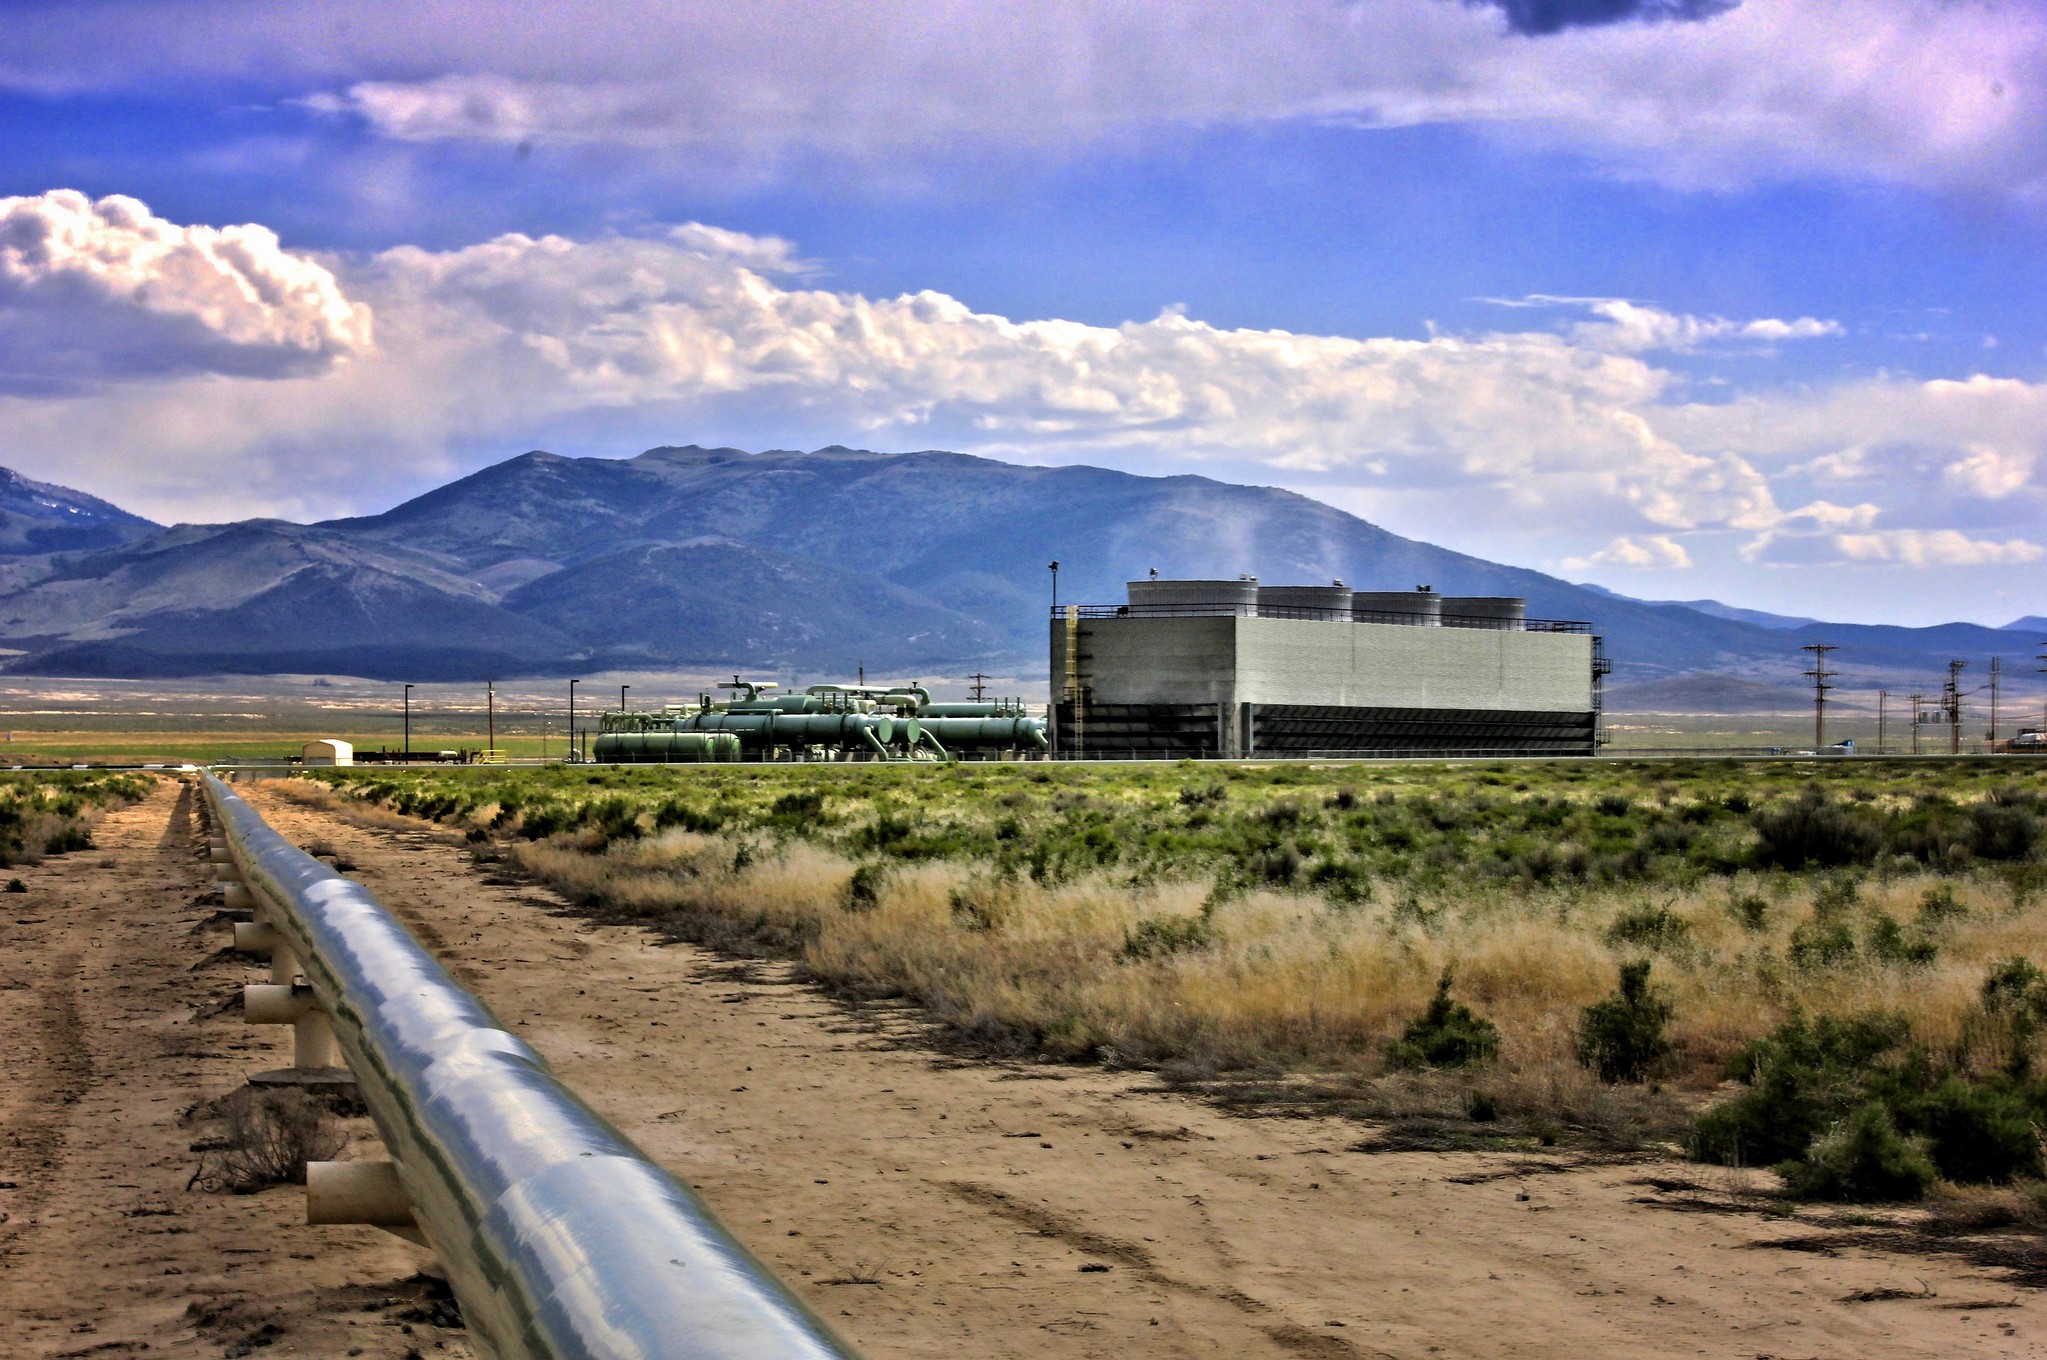 Photograph of the Raft River Geothermal Power Plant in Idaho. The photo shows a rectangular structure with four short cylindrical structures on top of it. Smoke appears to be coming from the cylinders. Green tanks can be seen next to the rectangular structure. A pipe runs from the geothermal plant to the foreground of the image. The landscape is flat with scrub. Low mountains rise in the background with a cloudy blue sky above.